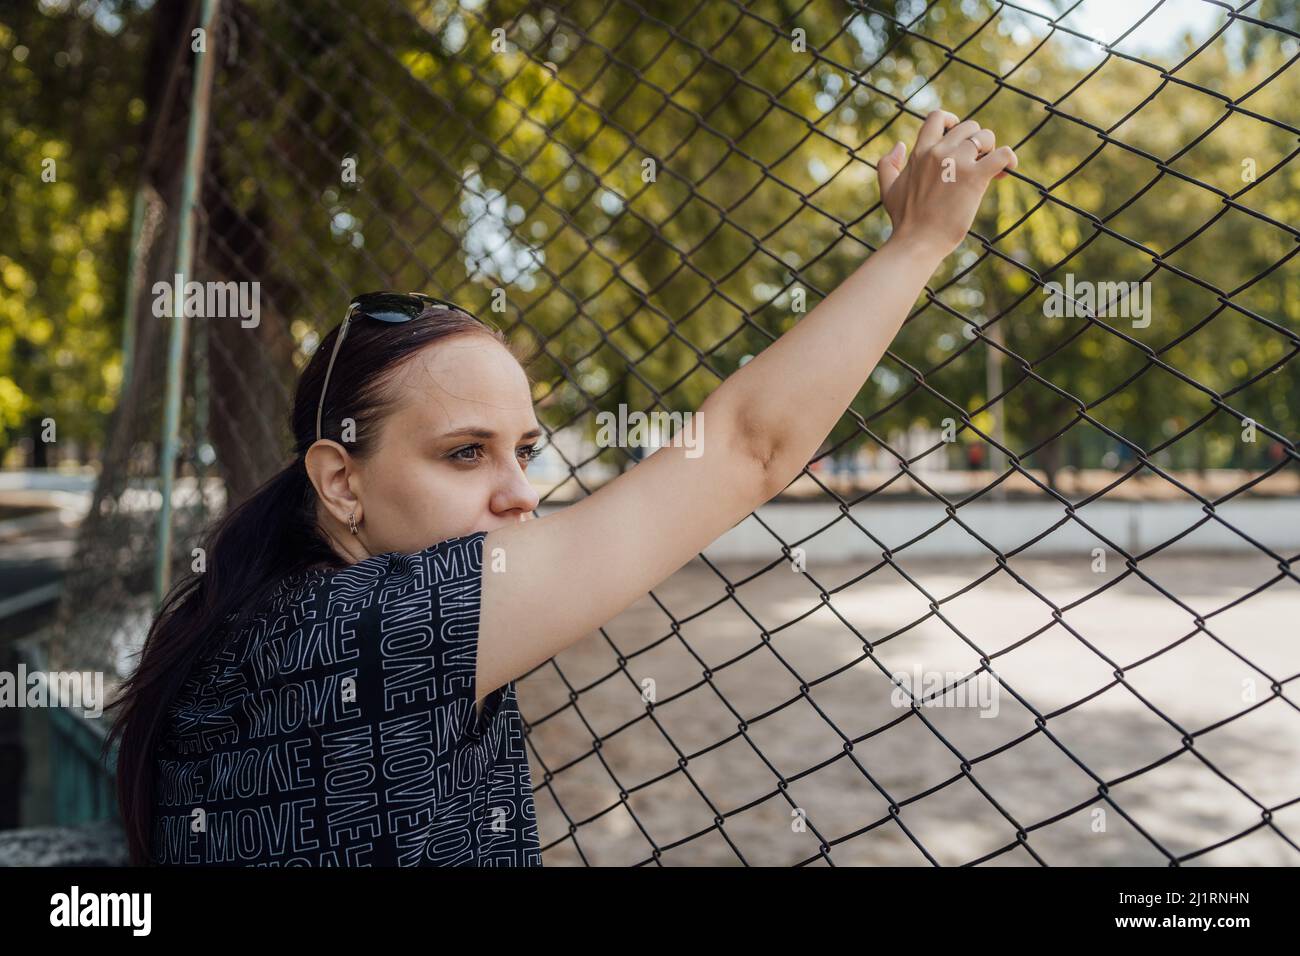 The hands on the lattice are symbolize limitation in something. Stock Photo